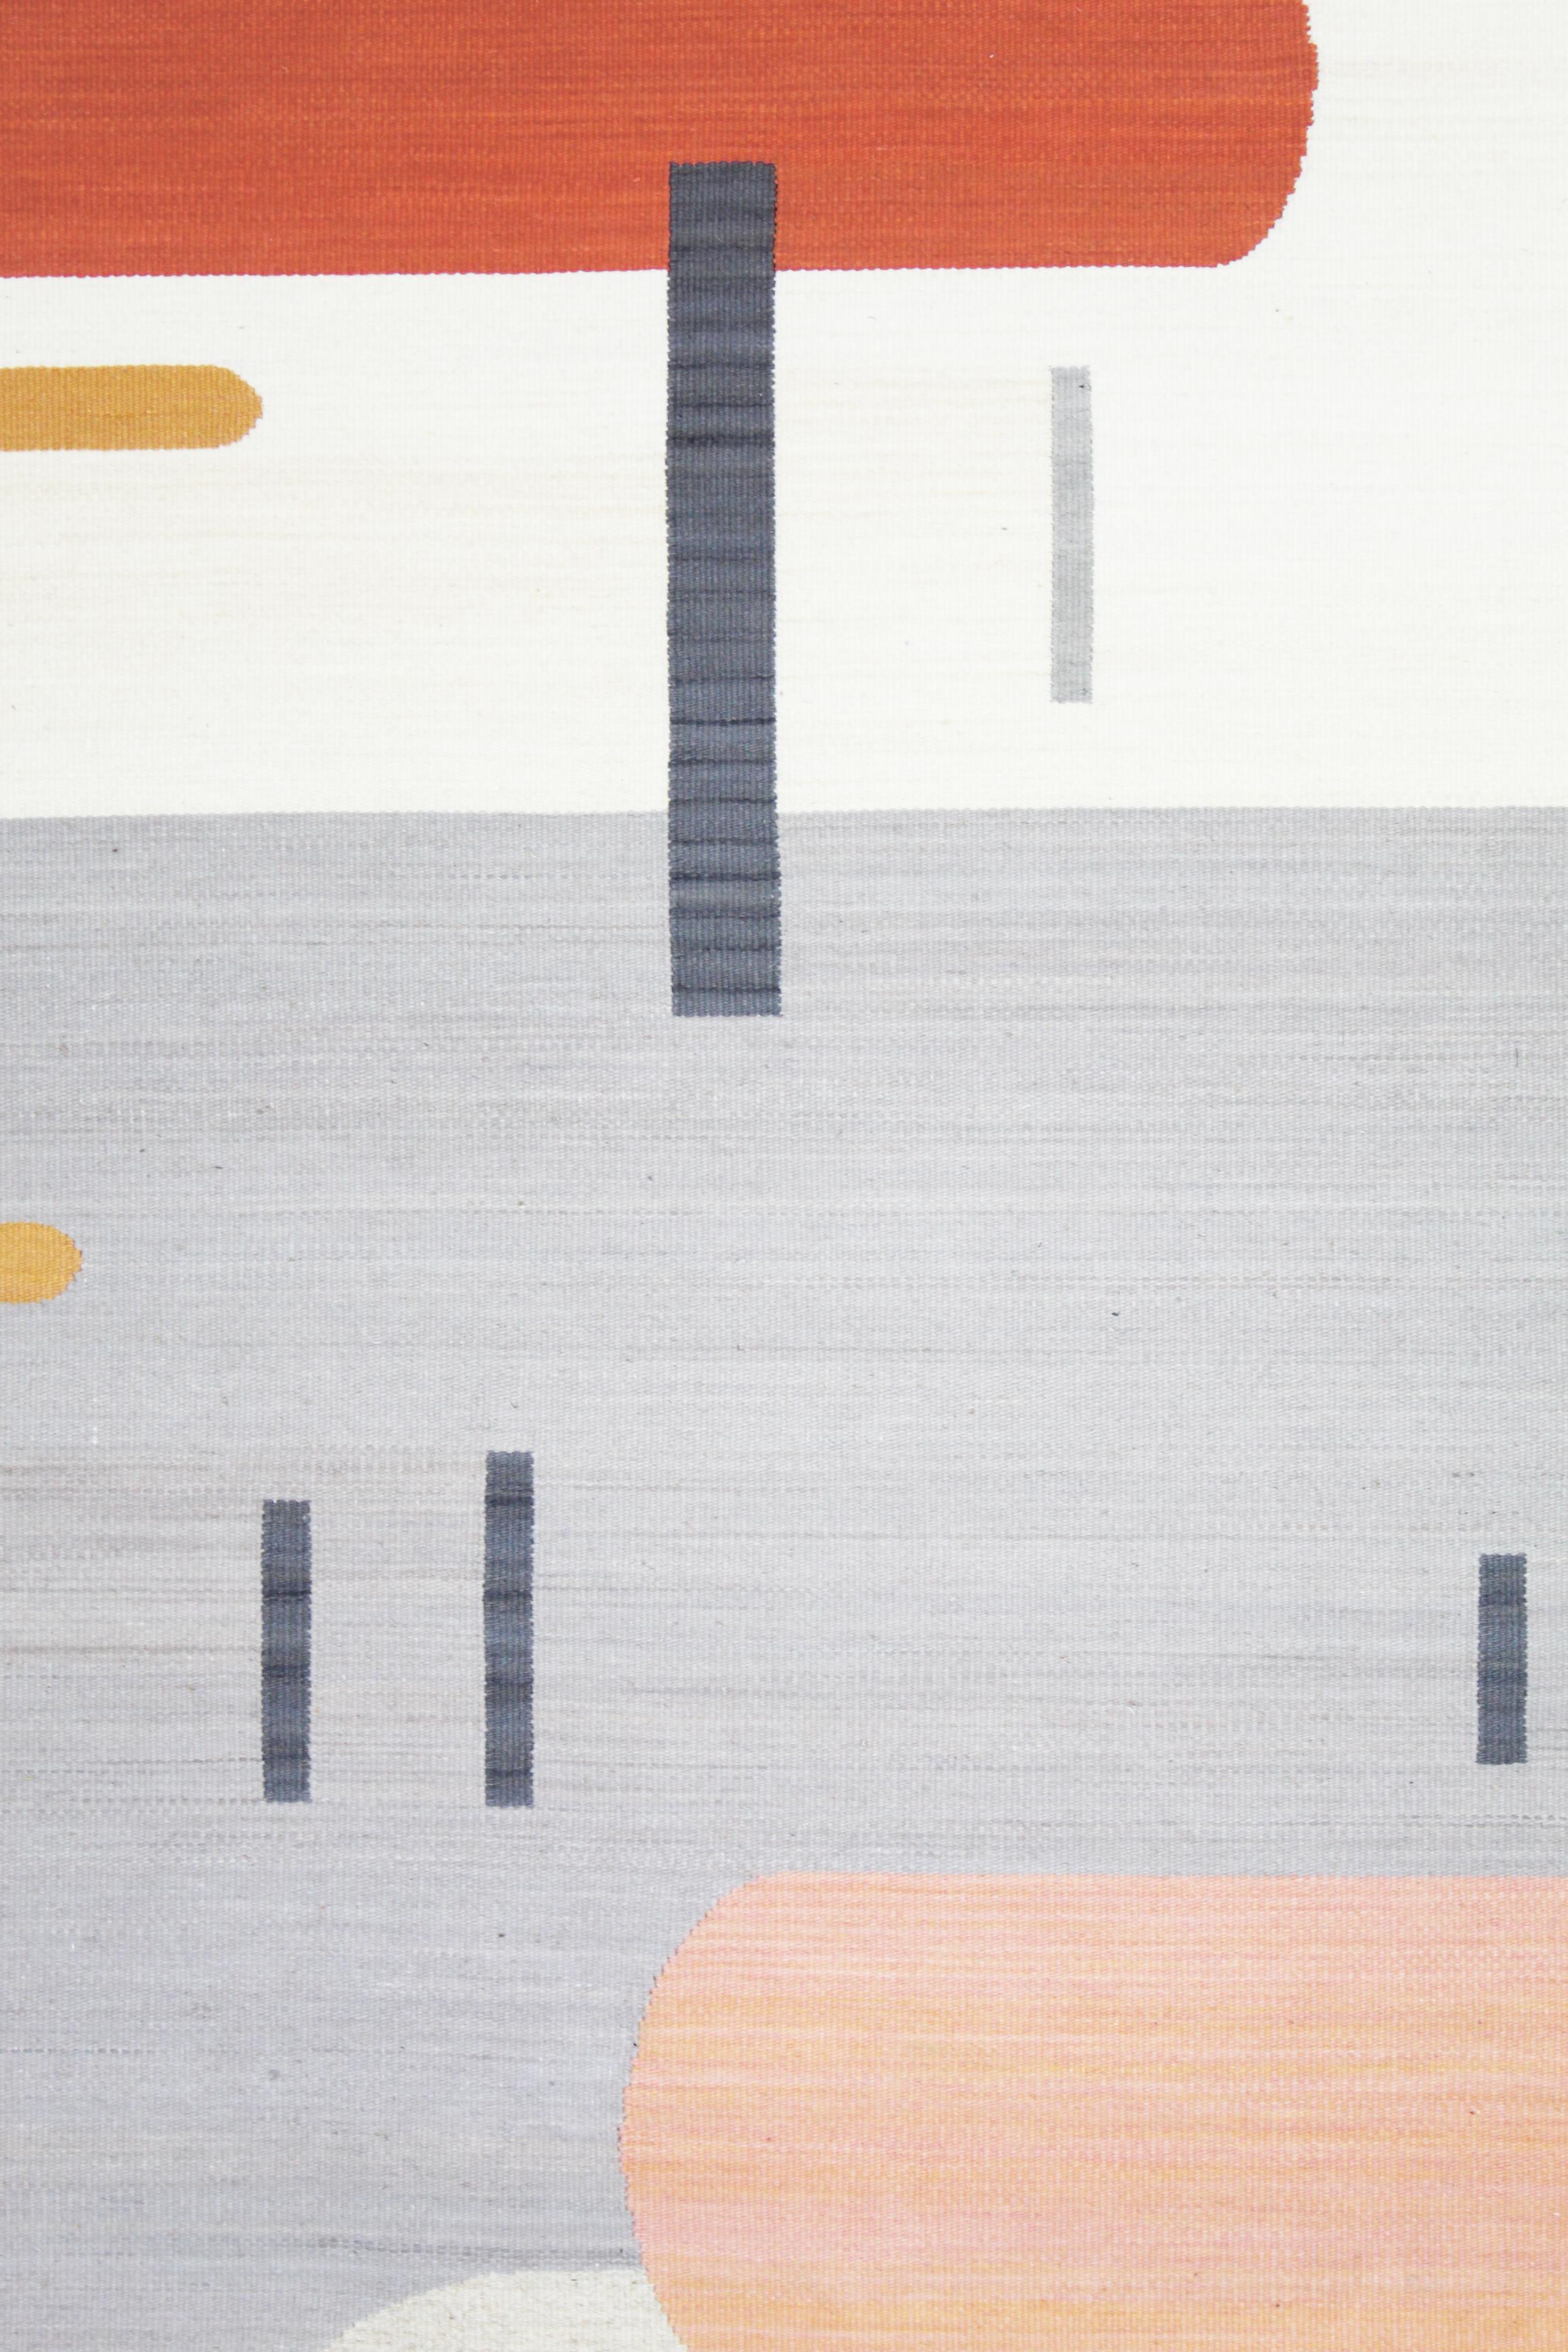 This rug is a one of a kind heirloom piece. Inspired by movement, the asymmetrical design is meant to enhance the flow of any space. With references to both Art Deco and contemporary design elements, this piece will stand out as an addition to any